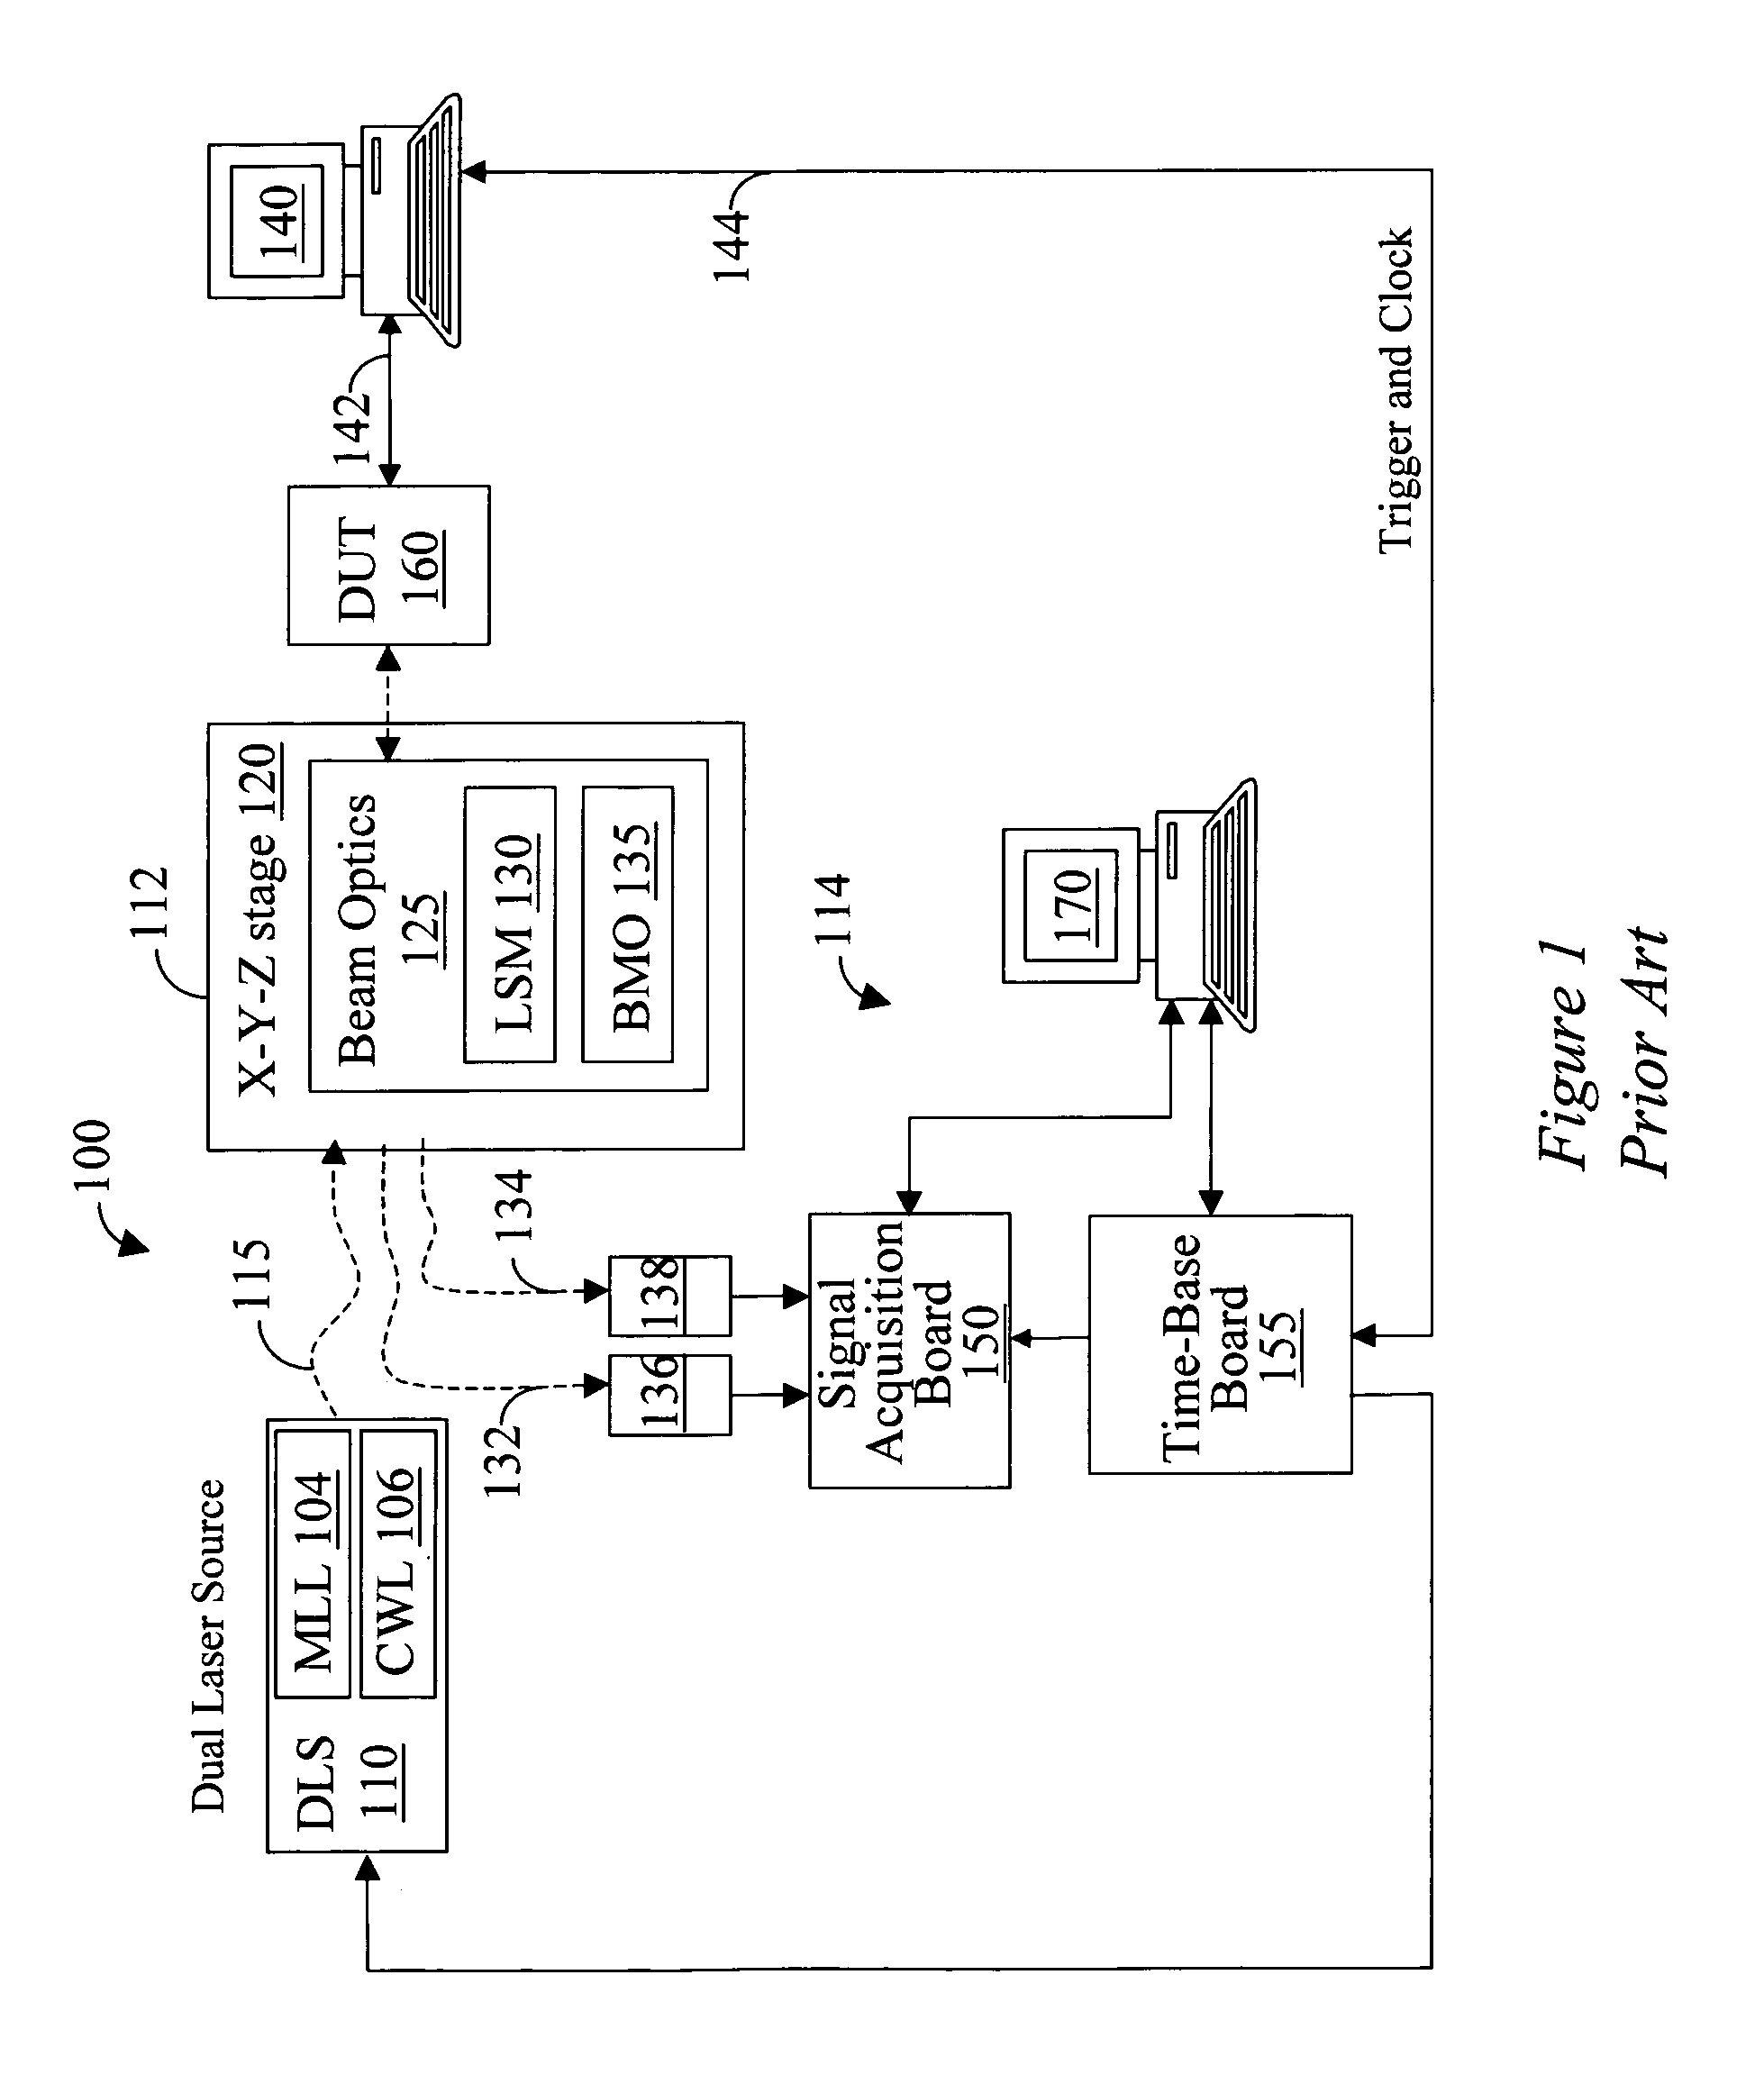 Apparatus and method for probing integrated circuits using laser illumination